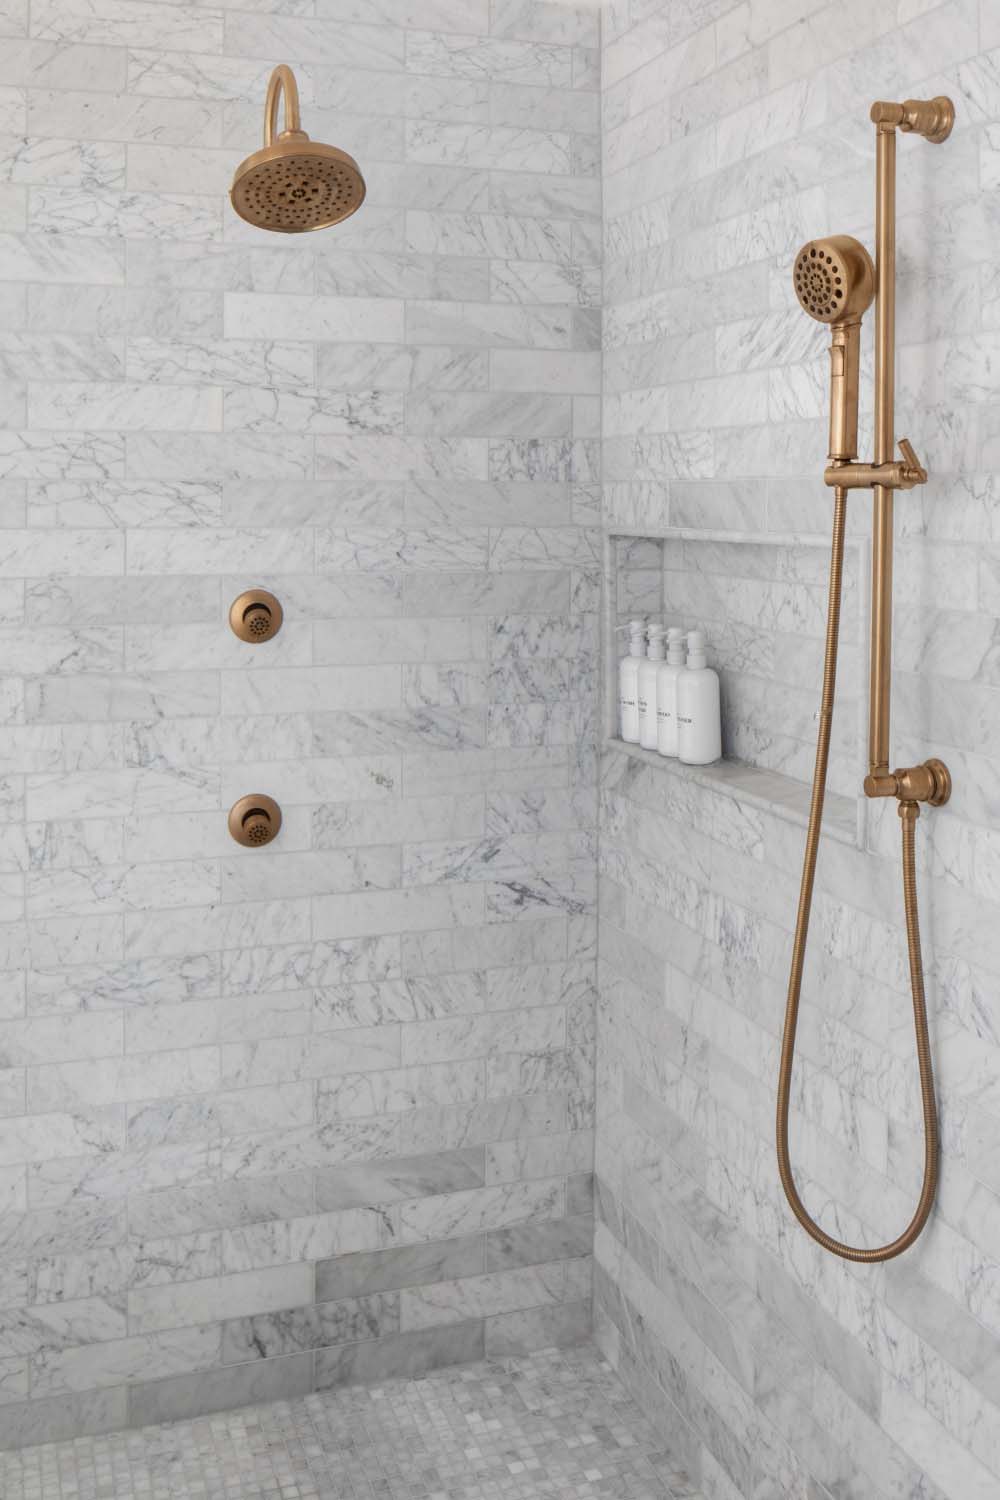 transitional style bathroom shower with white tiles